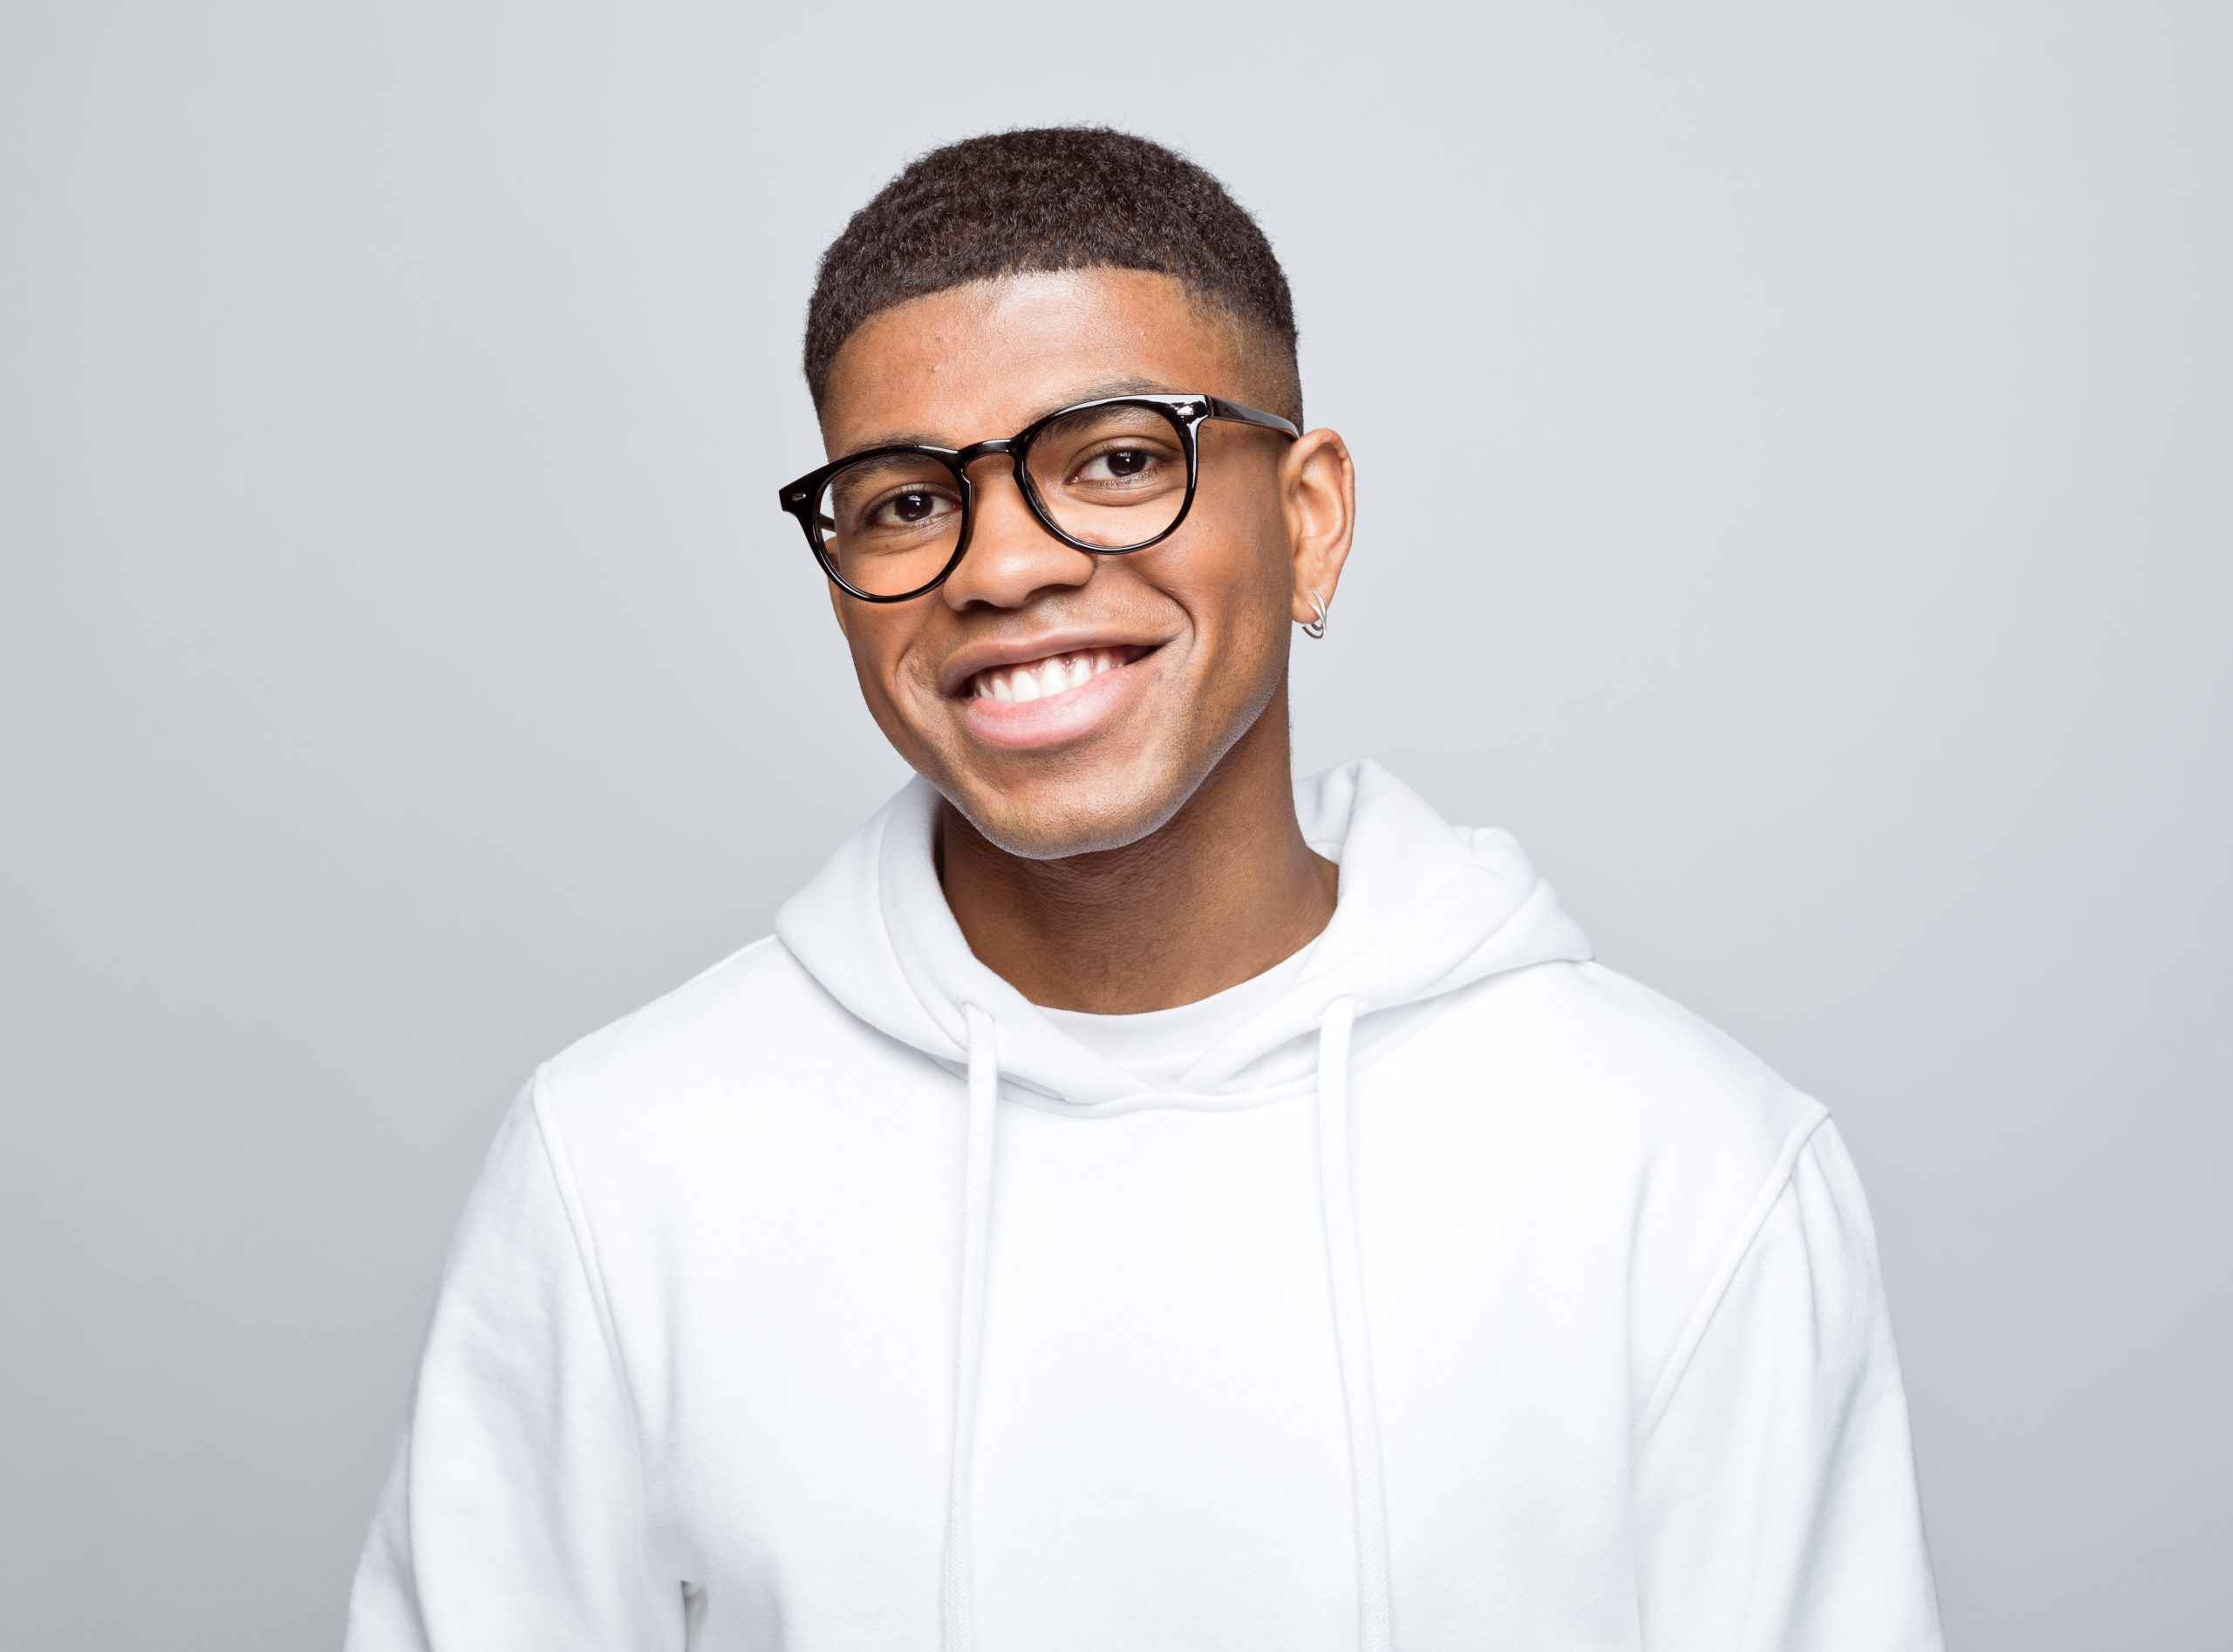 Portrait of a smiling young man with glasses and a white hoodie against a light grey background